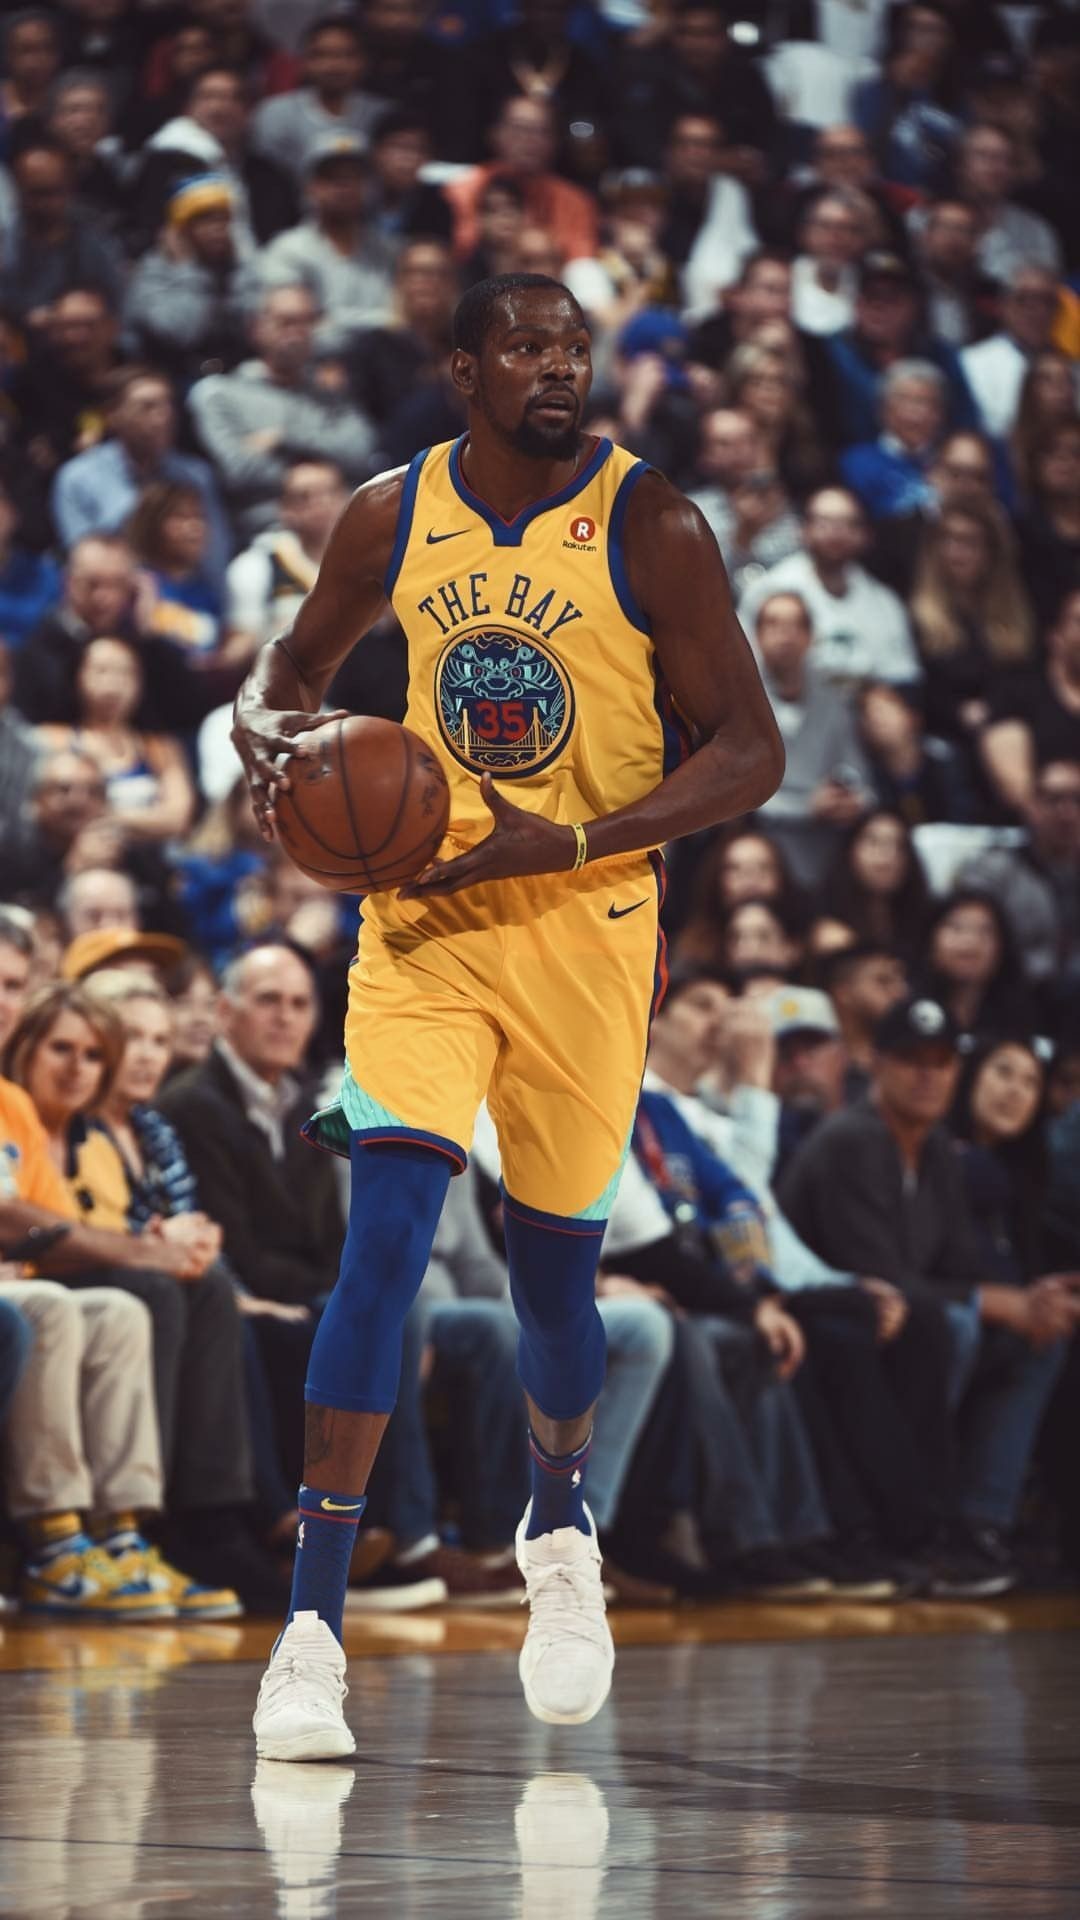 kevin durant wallpaper,basketball player,basketball,player,basketball court,sports collectible